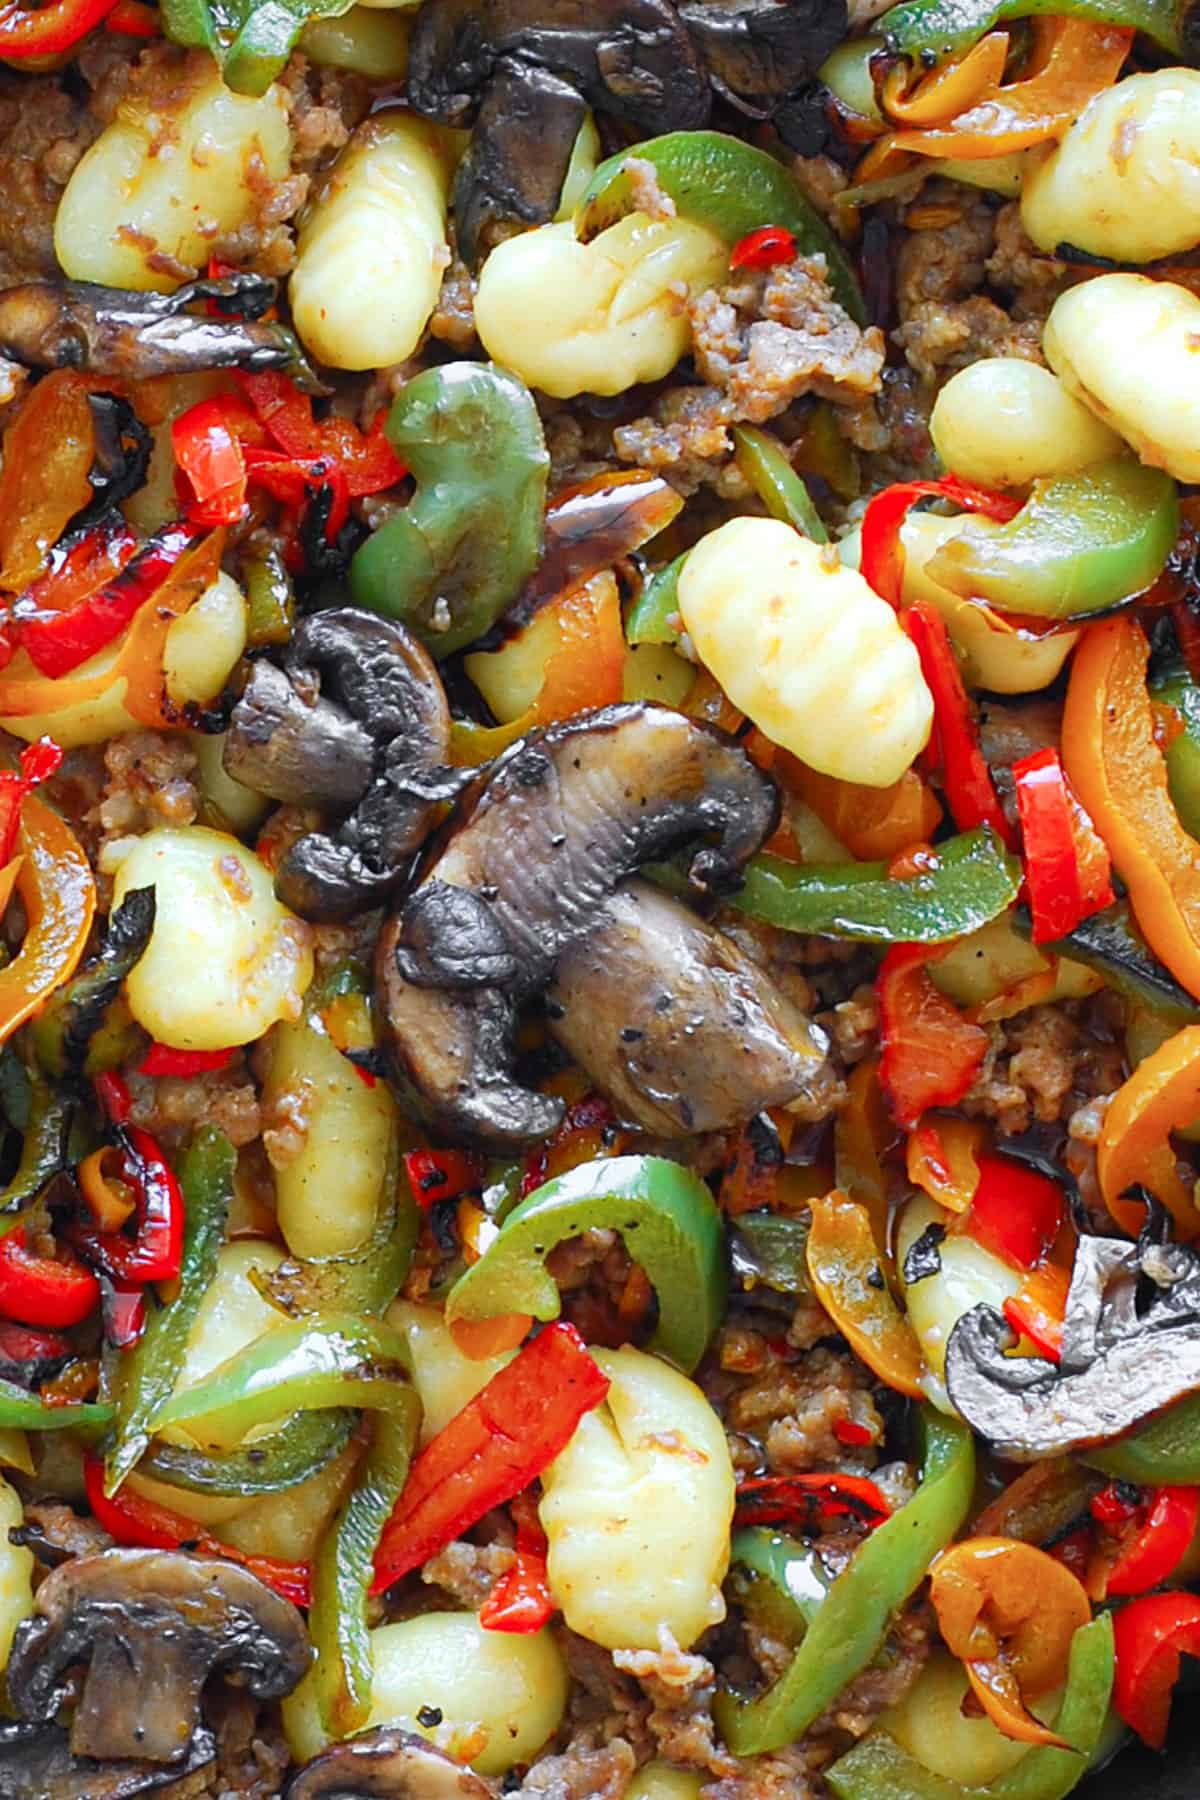 Spicy Italian Sausage Gnocchi with Mushrooms and Bell Peppers - close-up photo.